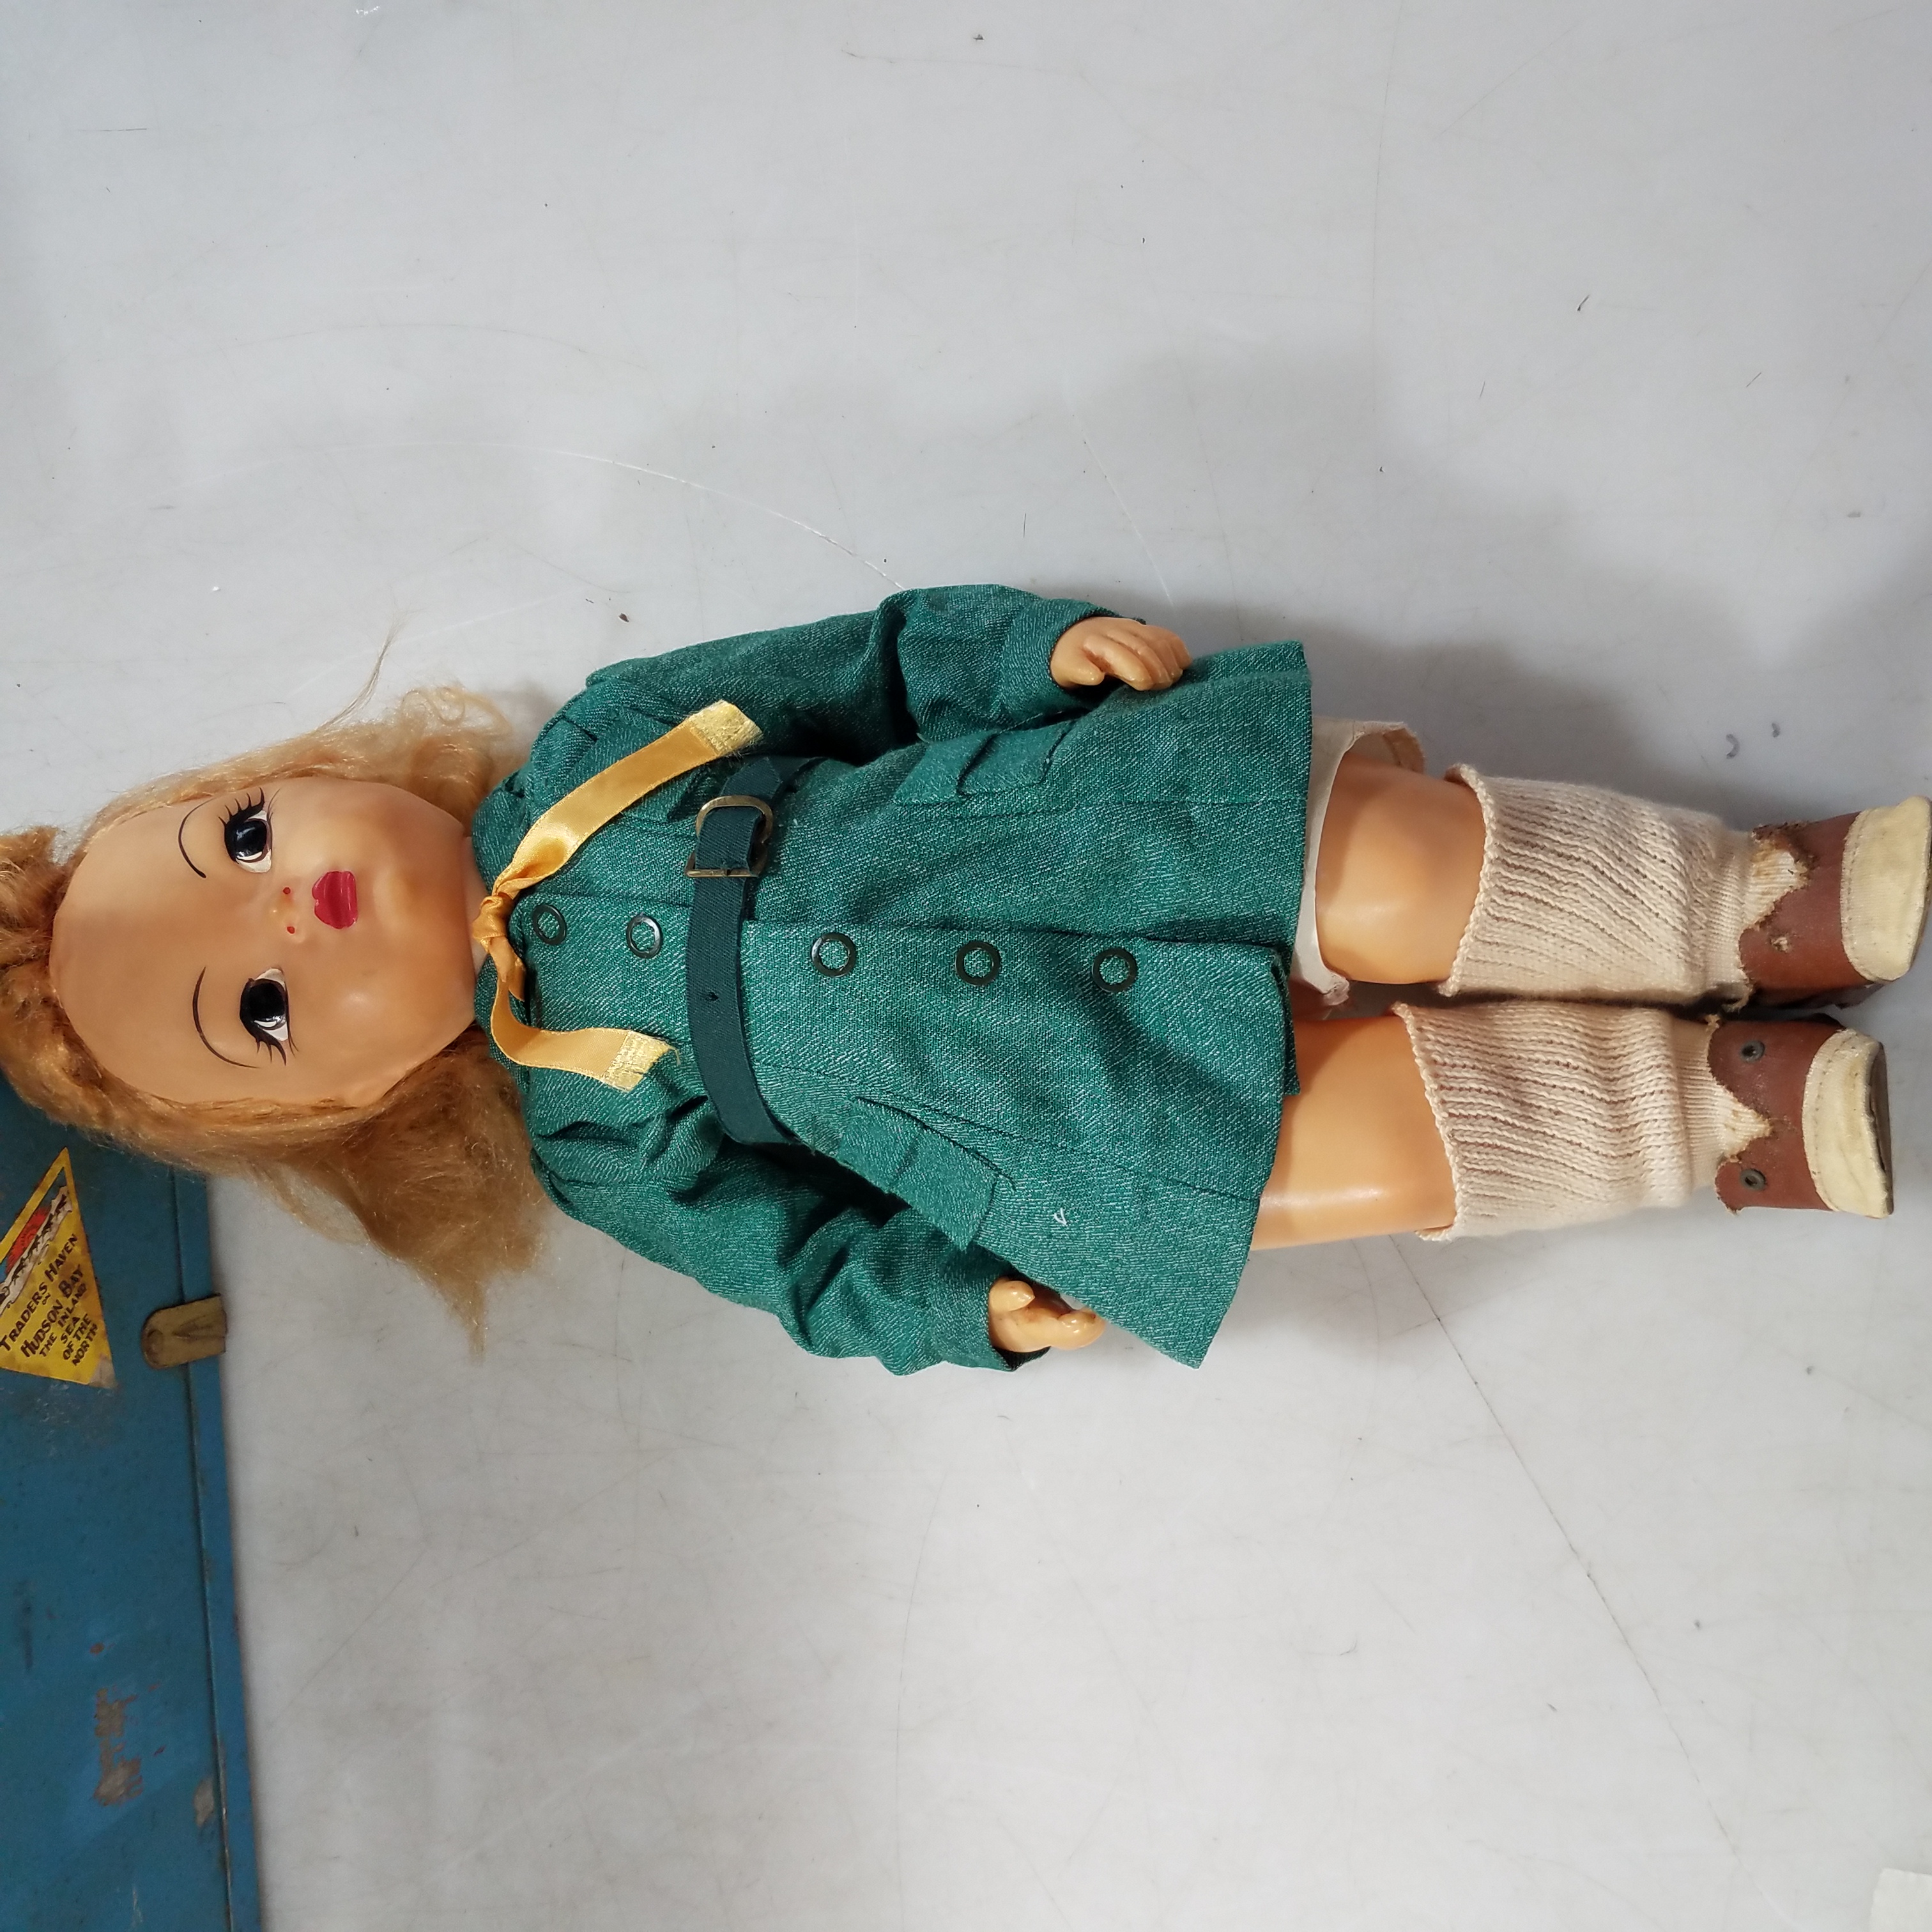 Buy the Vintage Terri Lee Doll w/Clothes & Case | GoodwillFinds